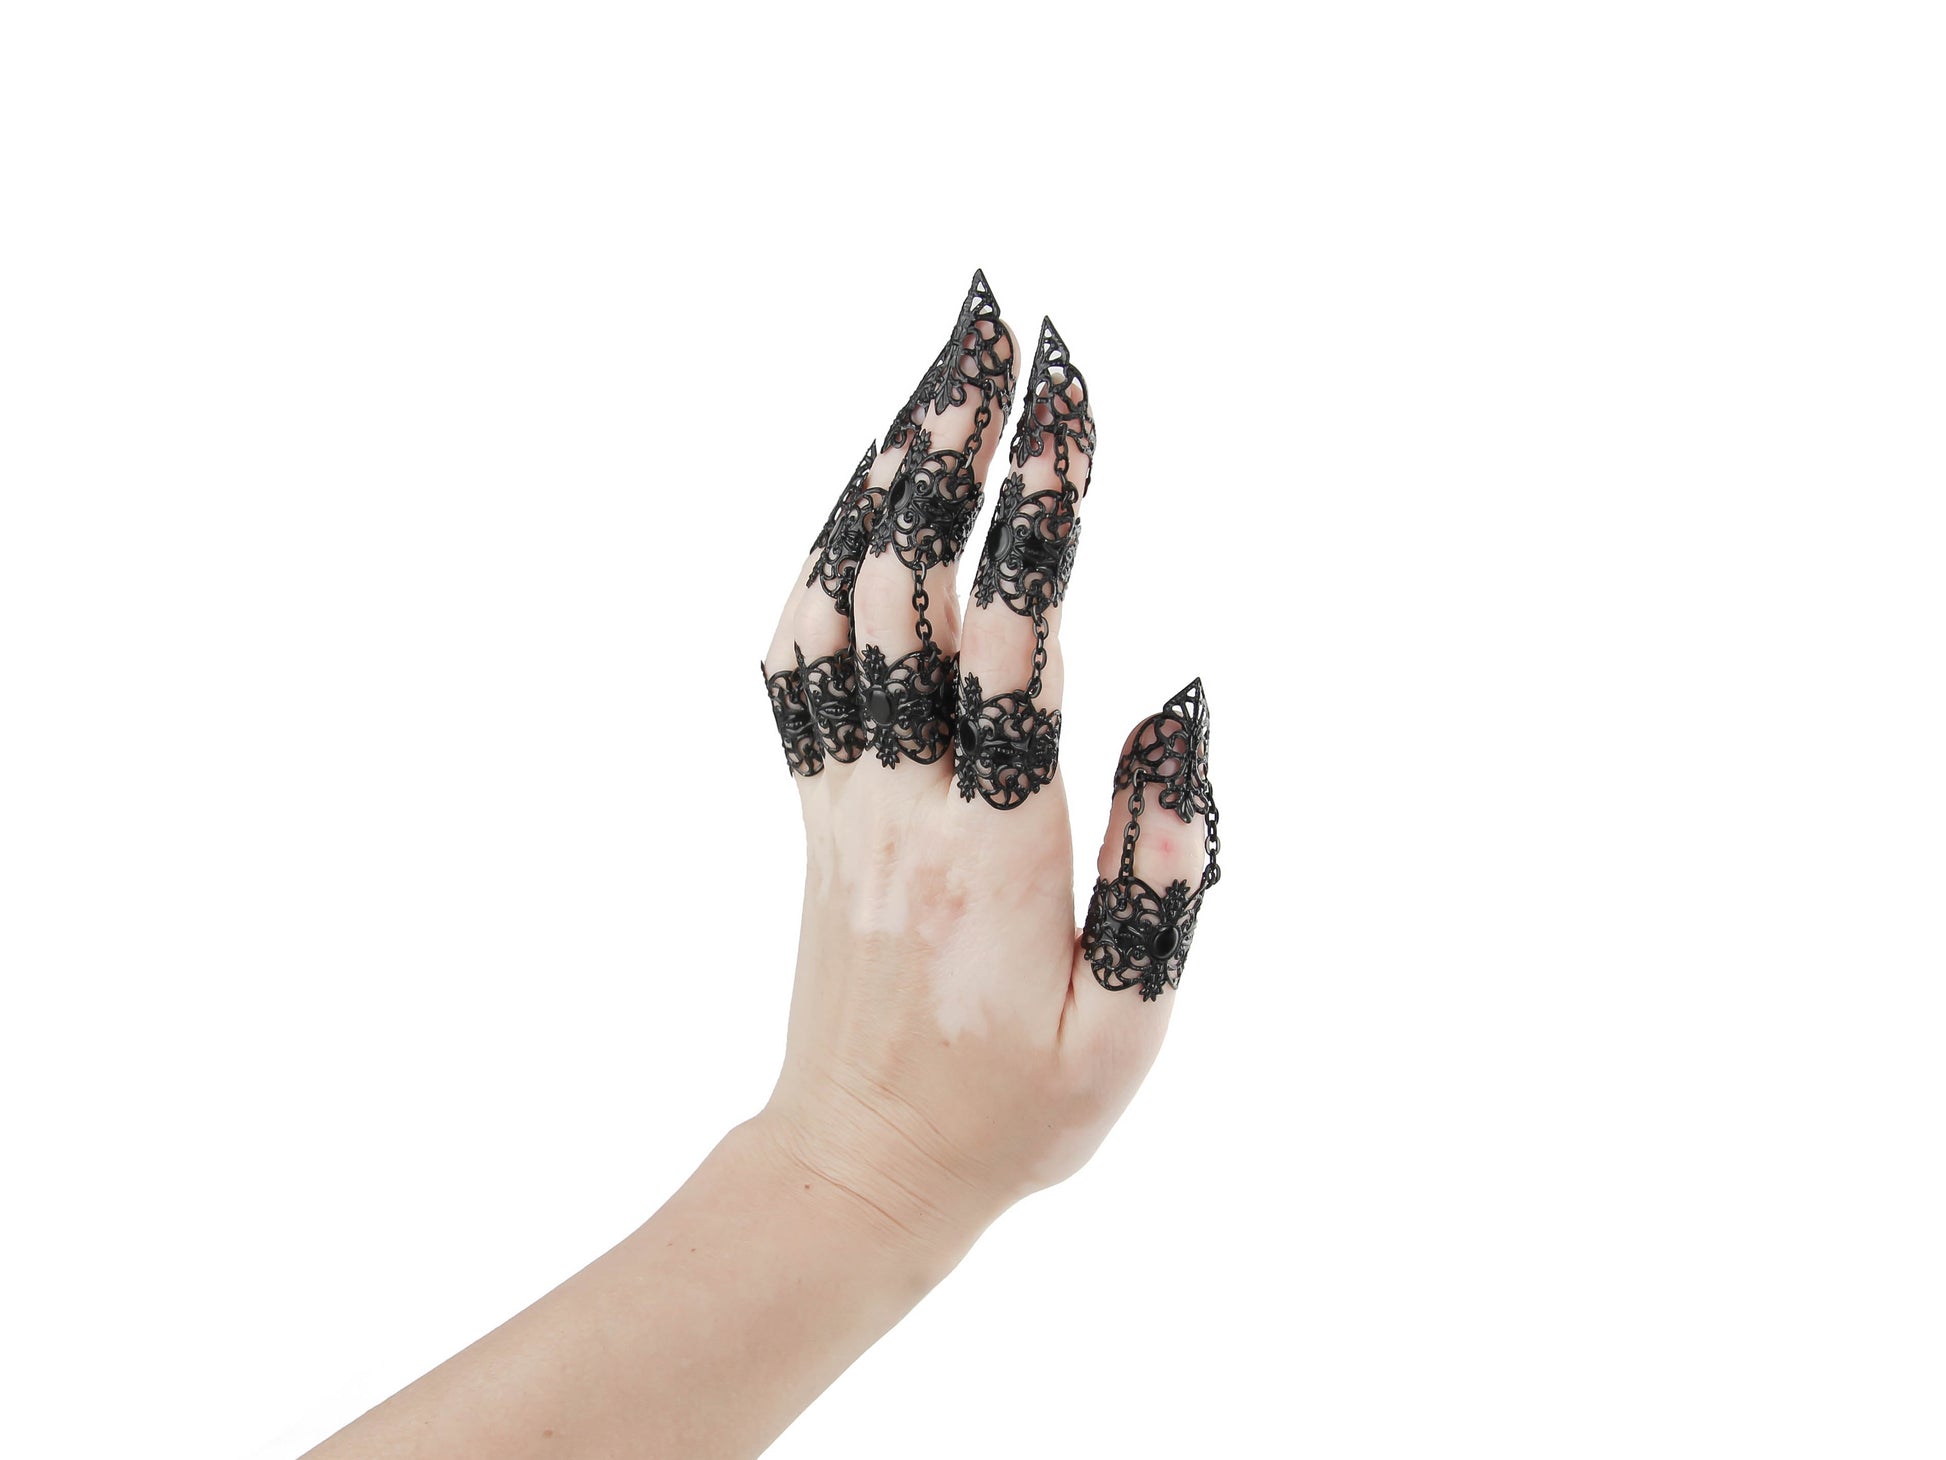 A hand displays a full finger black claw ring set from Myril Jewels, crafted with exquisite detail for a striking neo-goth look. Ideal for lovers of gothic-chic and witchcore styles, these rings add a daring touch to any ensemble, perfect for Halloween, festivals, or as a bold statement piece in everyday goth fashion.